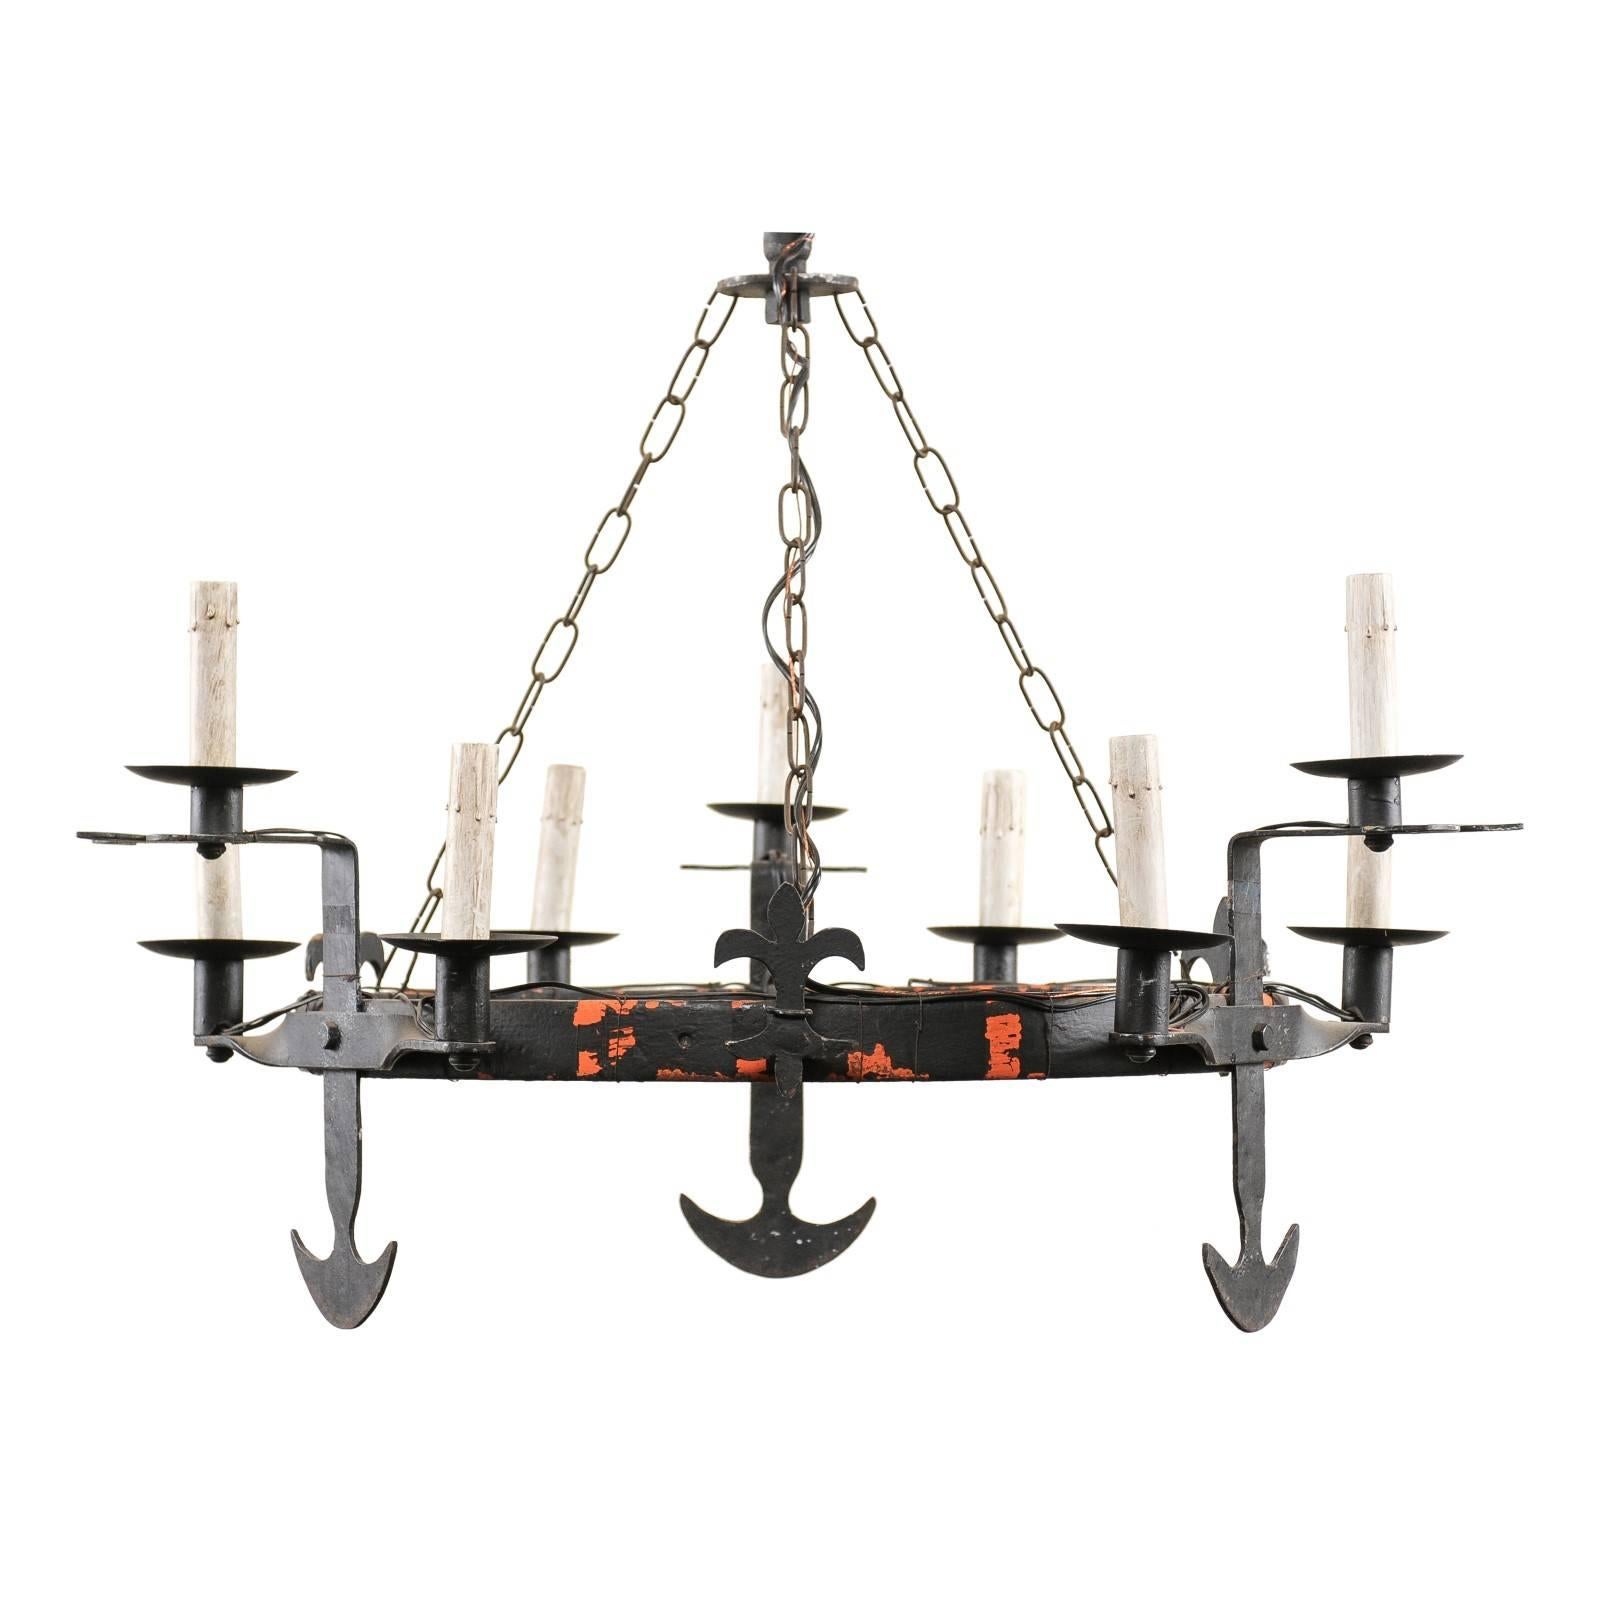 French Ring Shaped Iron Chandelier from the Mid-20th Century with Anchor Motifs